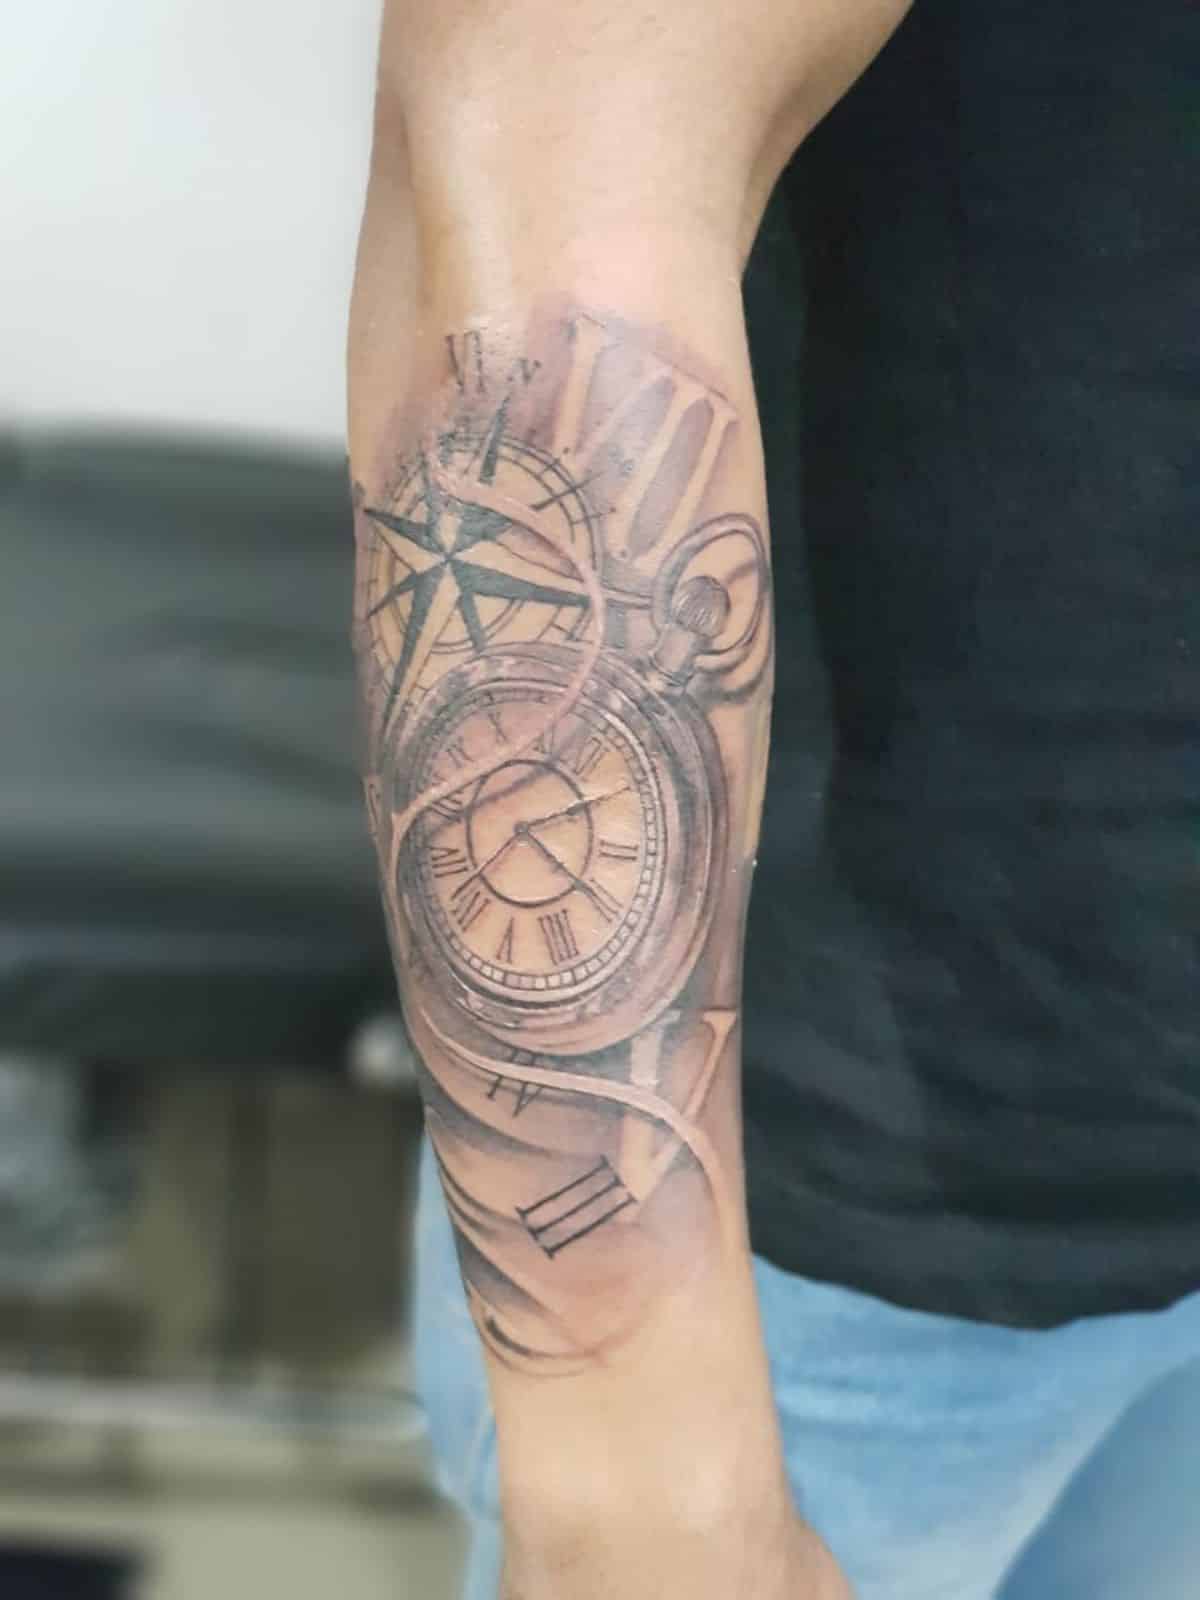 100 Awesome Compass Tattoo Designs | Art and Design | Cool forearm tattoos, Forearm  tattoo design, Tattoo designs